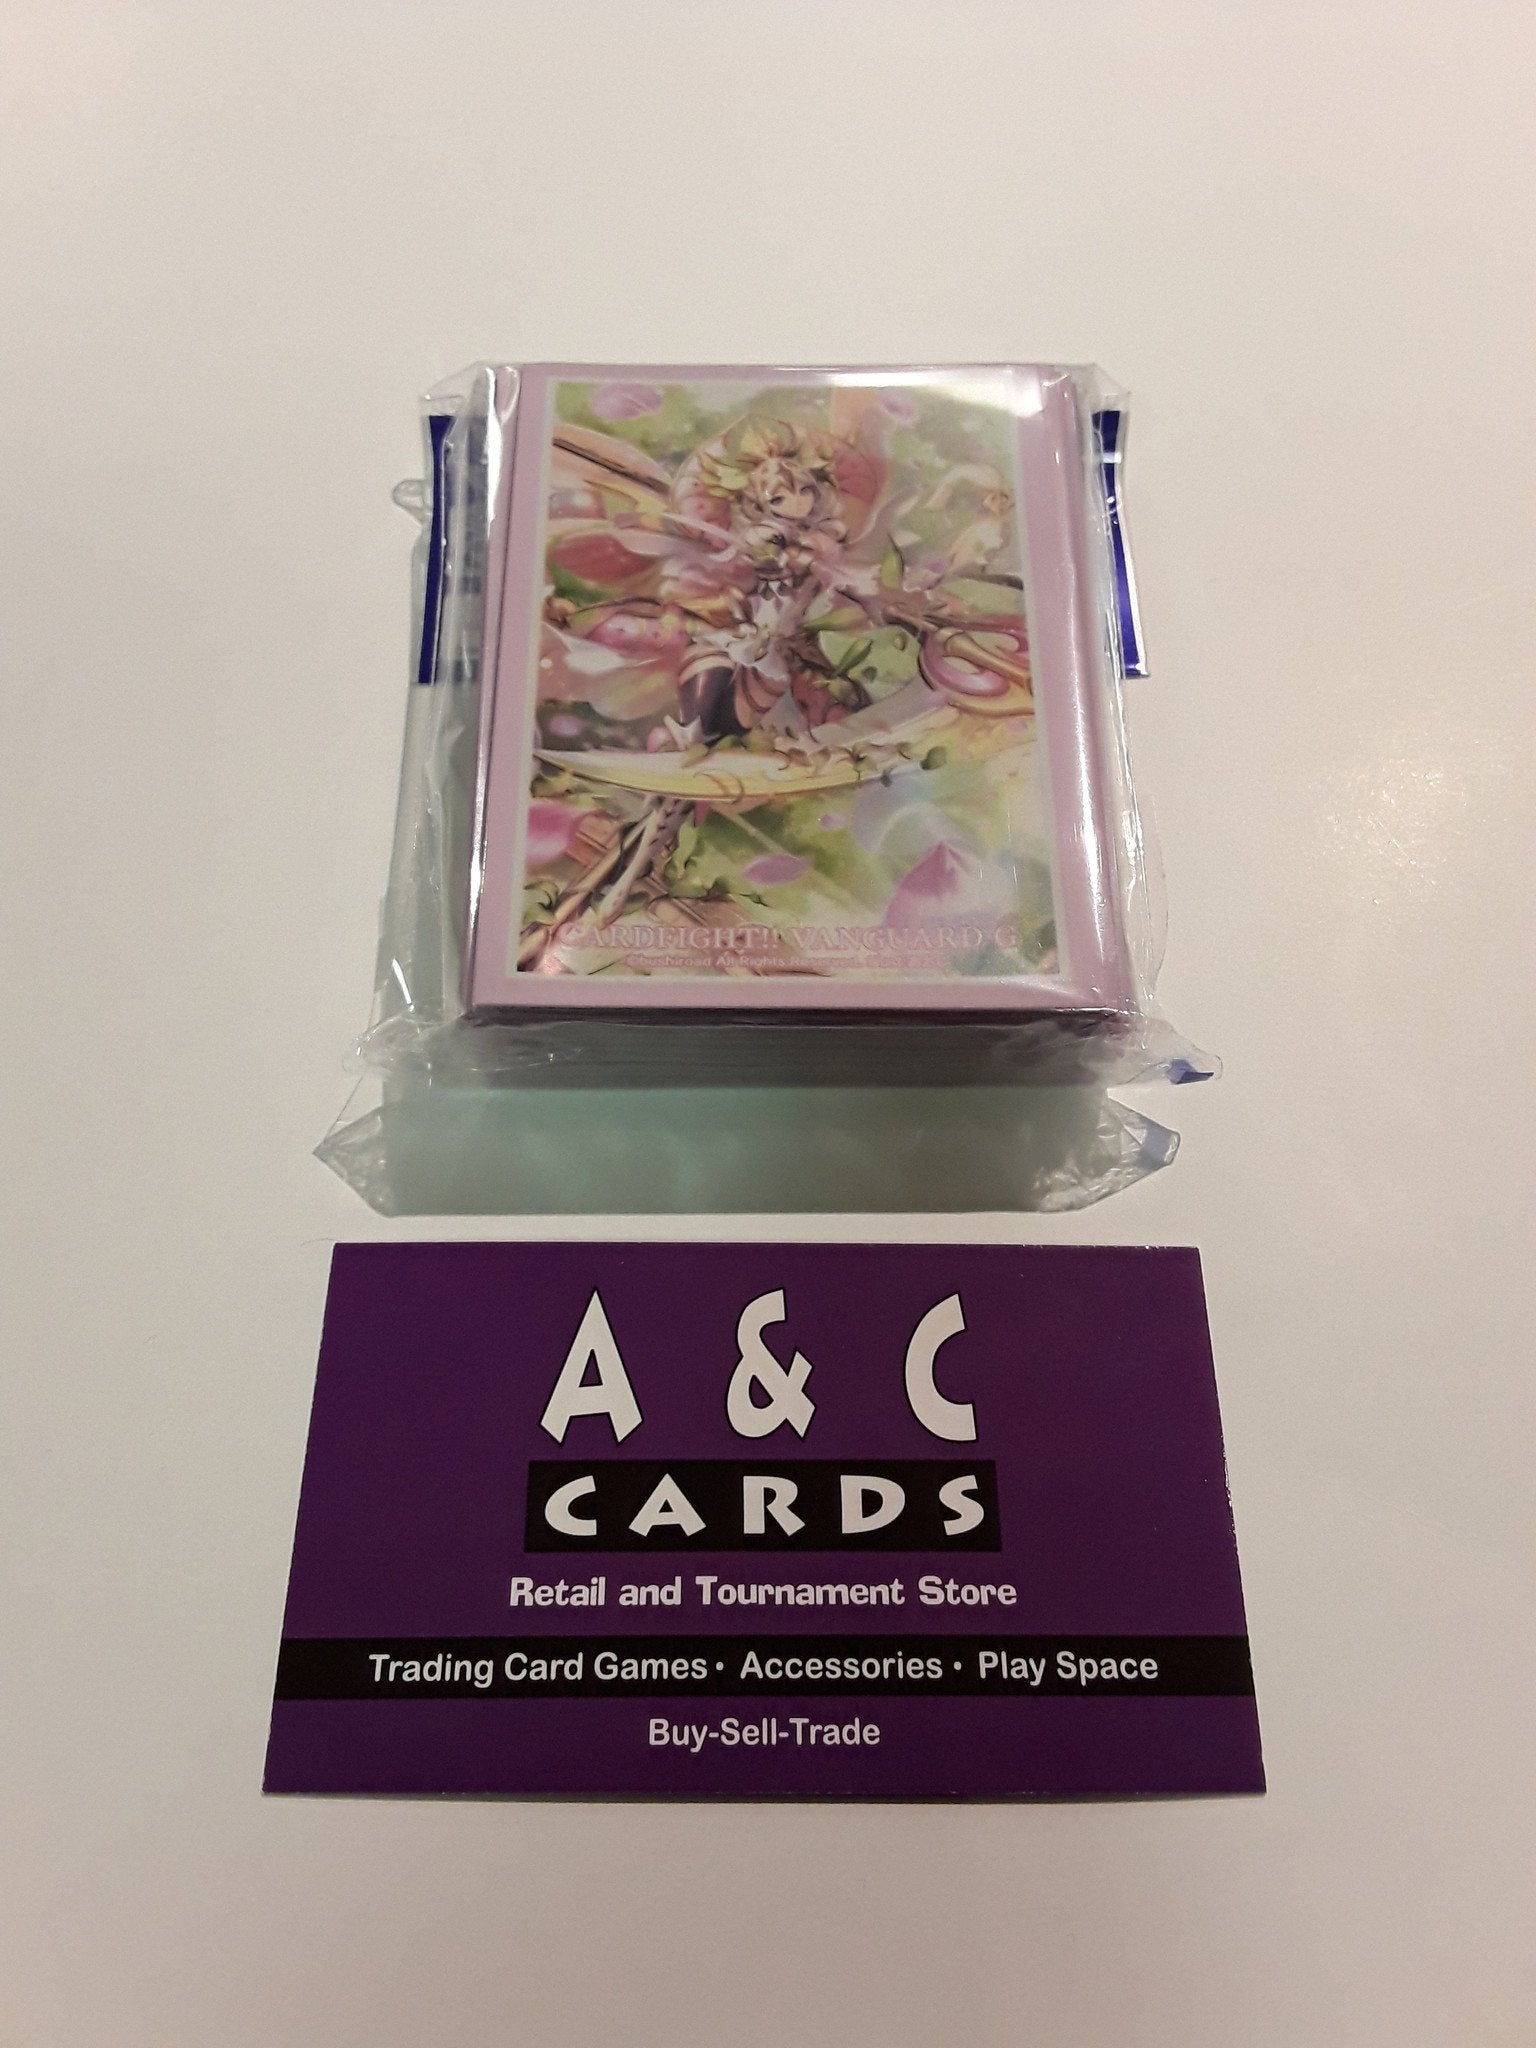 Character Sleeves "Flower Princess of Balmy Breeze, Ilmatar" #1 - 1 pack of Mini Size Sleeves 70pc - Cardfight!! Vanguard